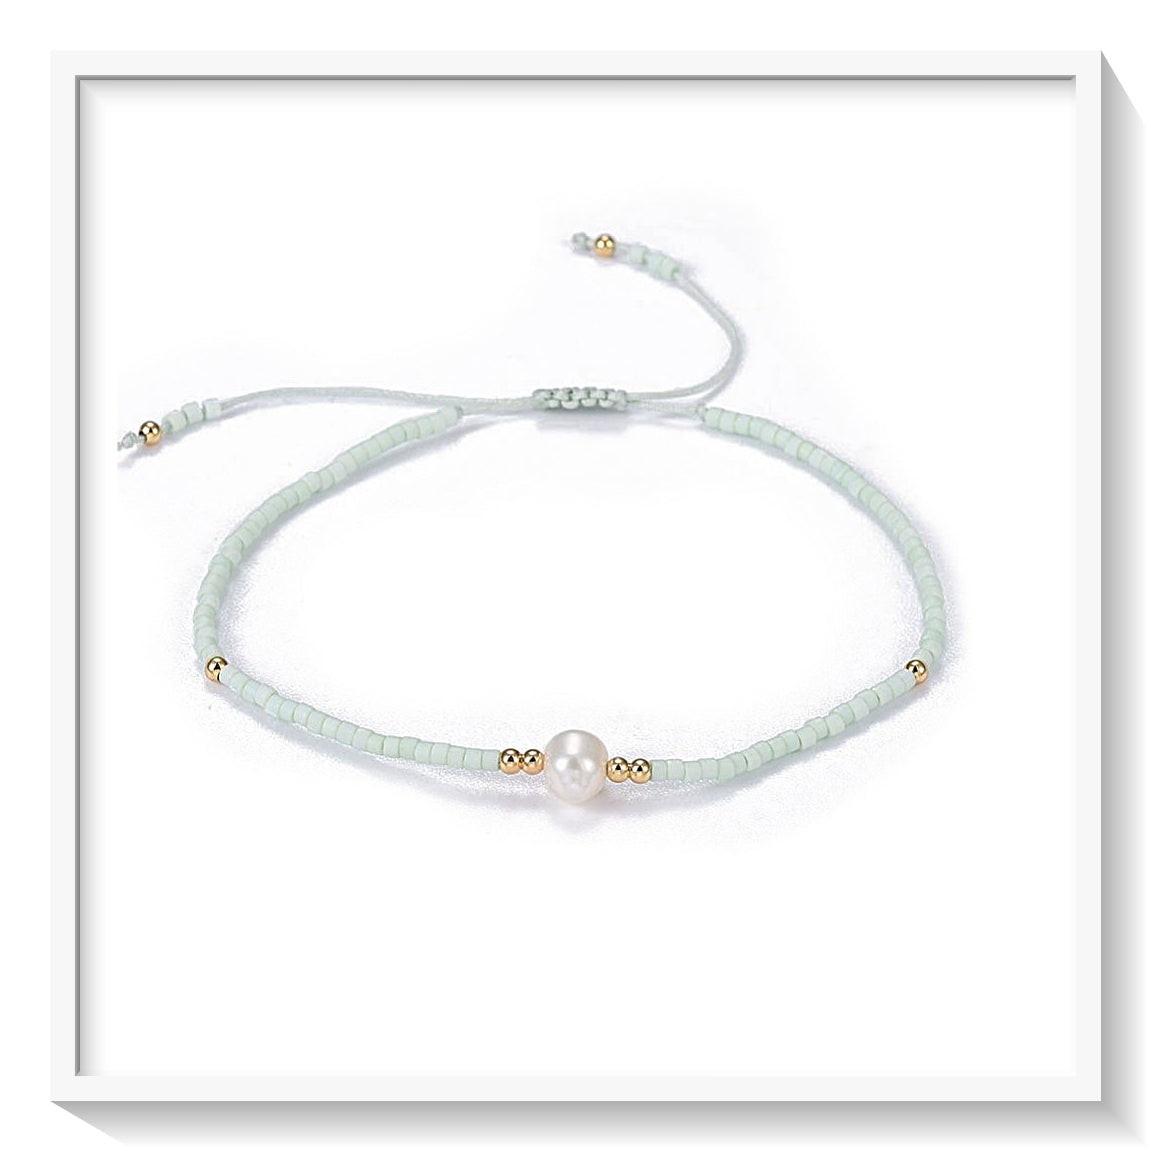 Buy your Pearl & Seed Bead Adjustable Bracelet online now or in store at Forever Gems in Franschhoek, South Africa